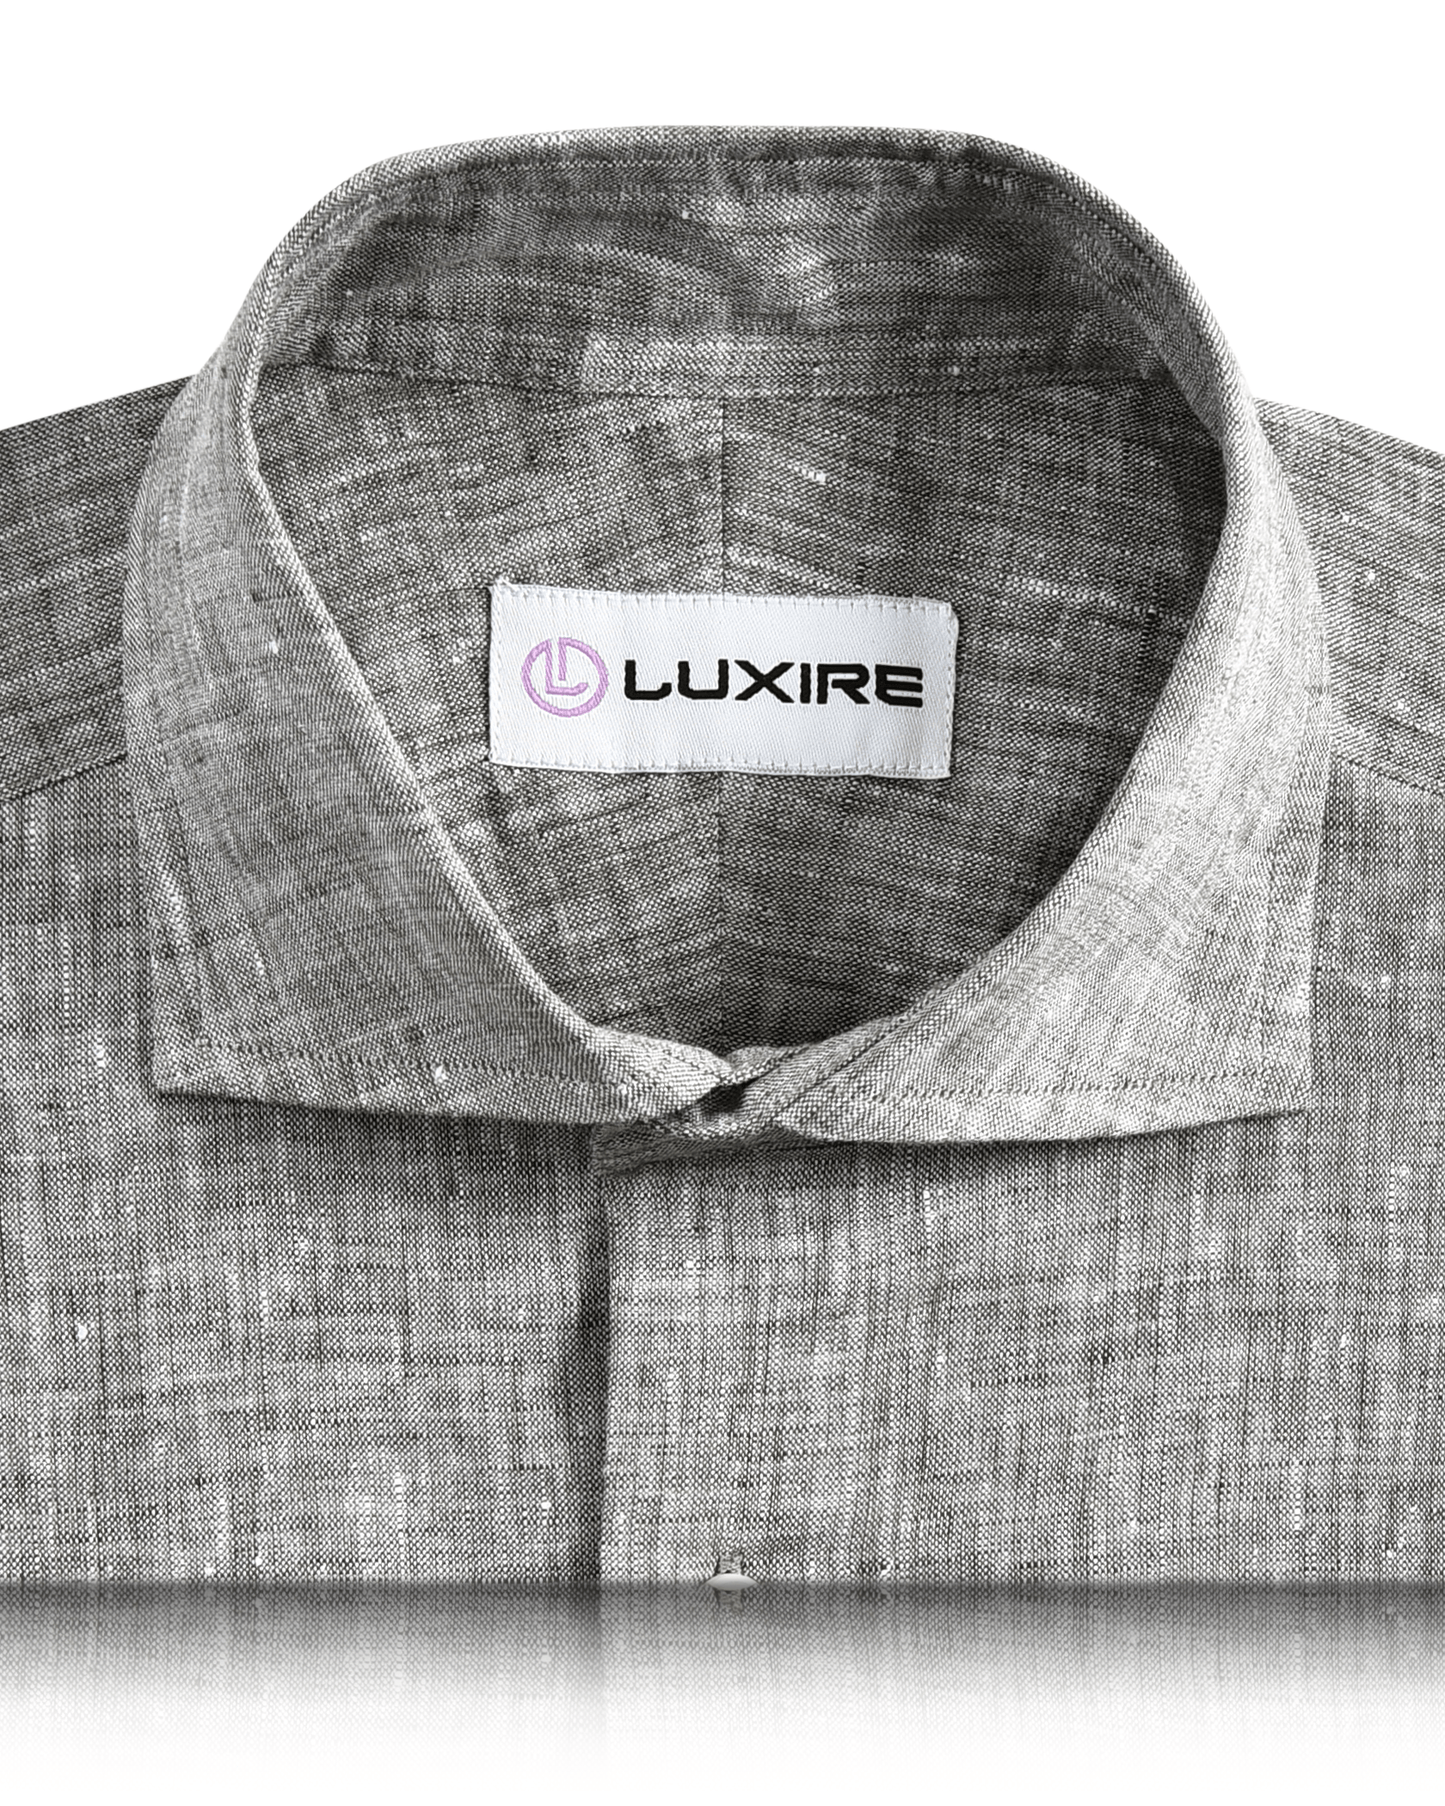 Collar of the custom linen shirt for men in brown by Luxire Clothing